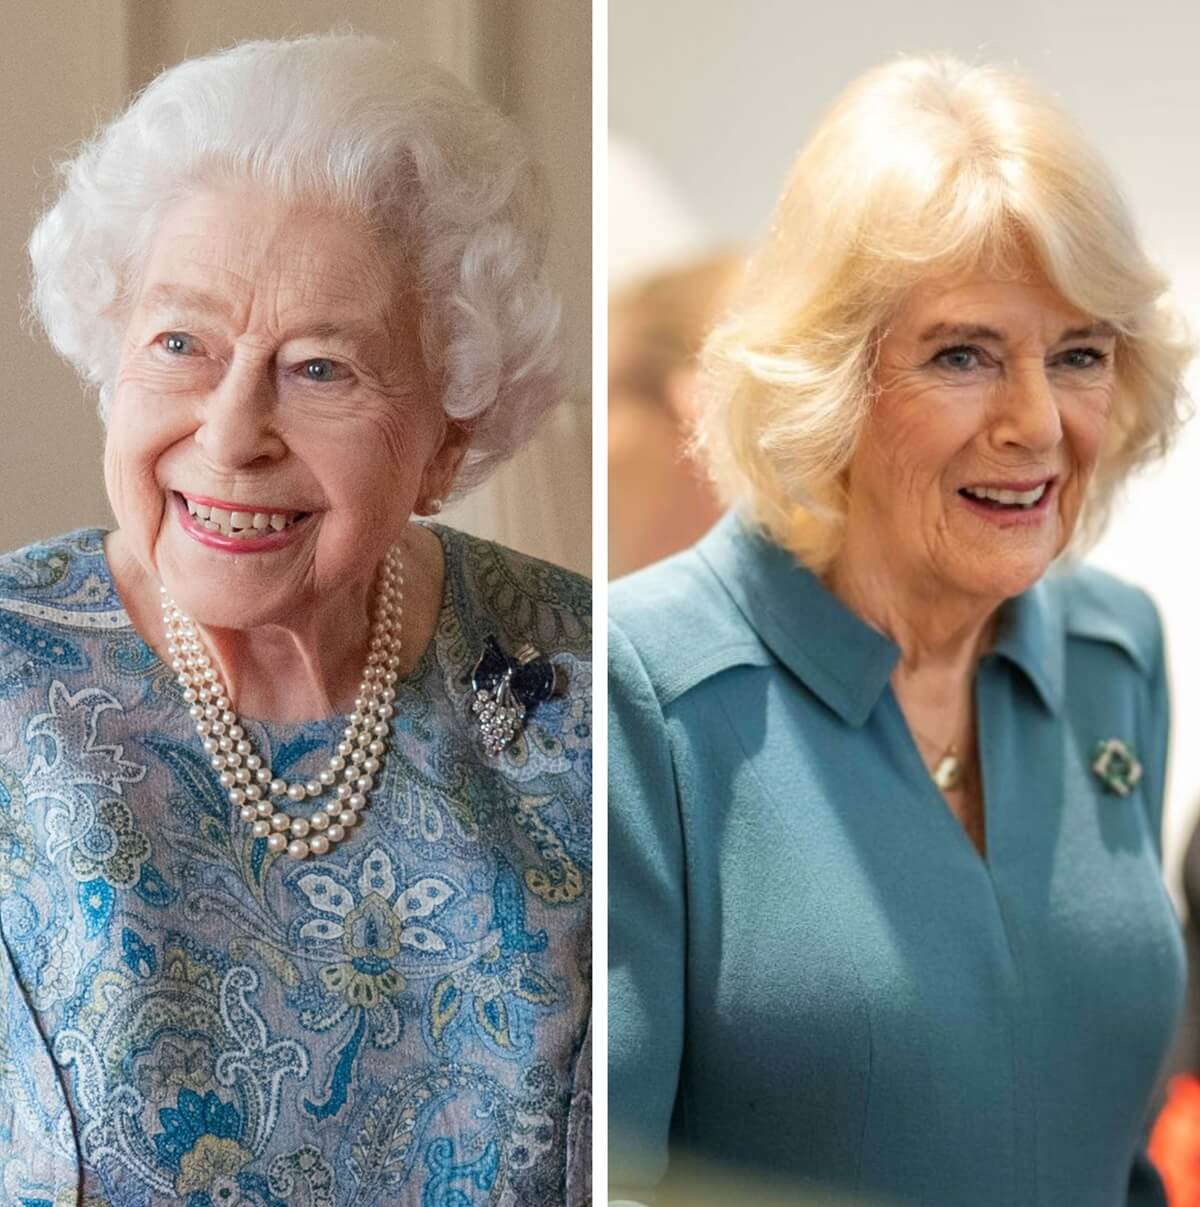 (L) Queen Elizabeth II holding an audience with President of Switzerland, (R) Queen Camilla during her visit to Maggie's new cancer support center in London